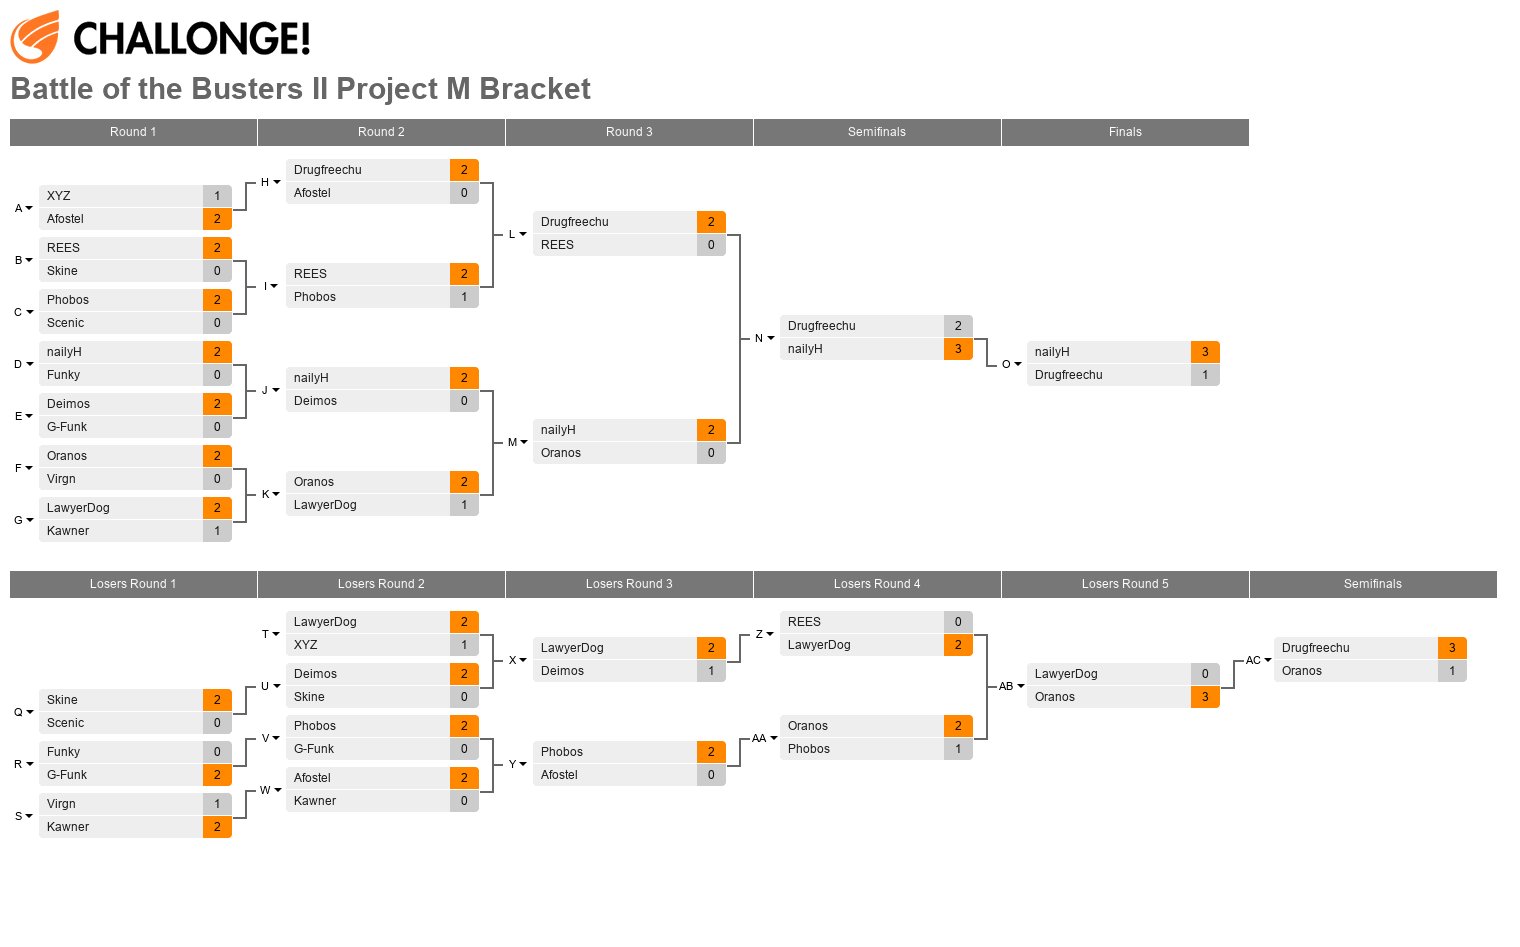 Battle of the Busters 2: Project M Bracket